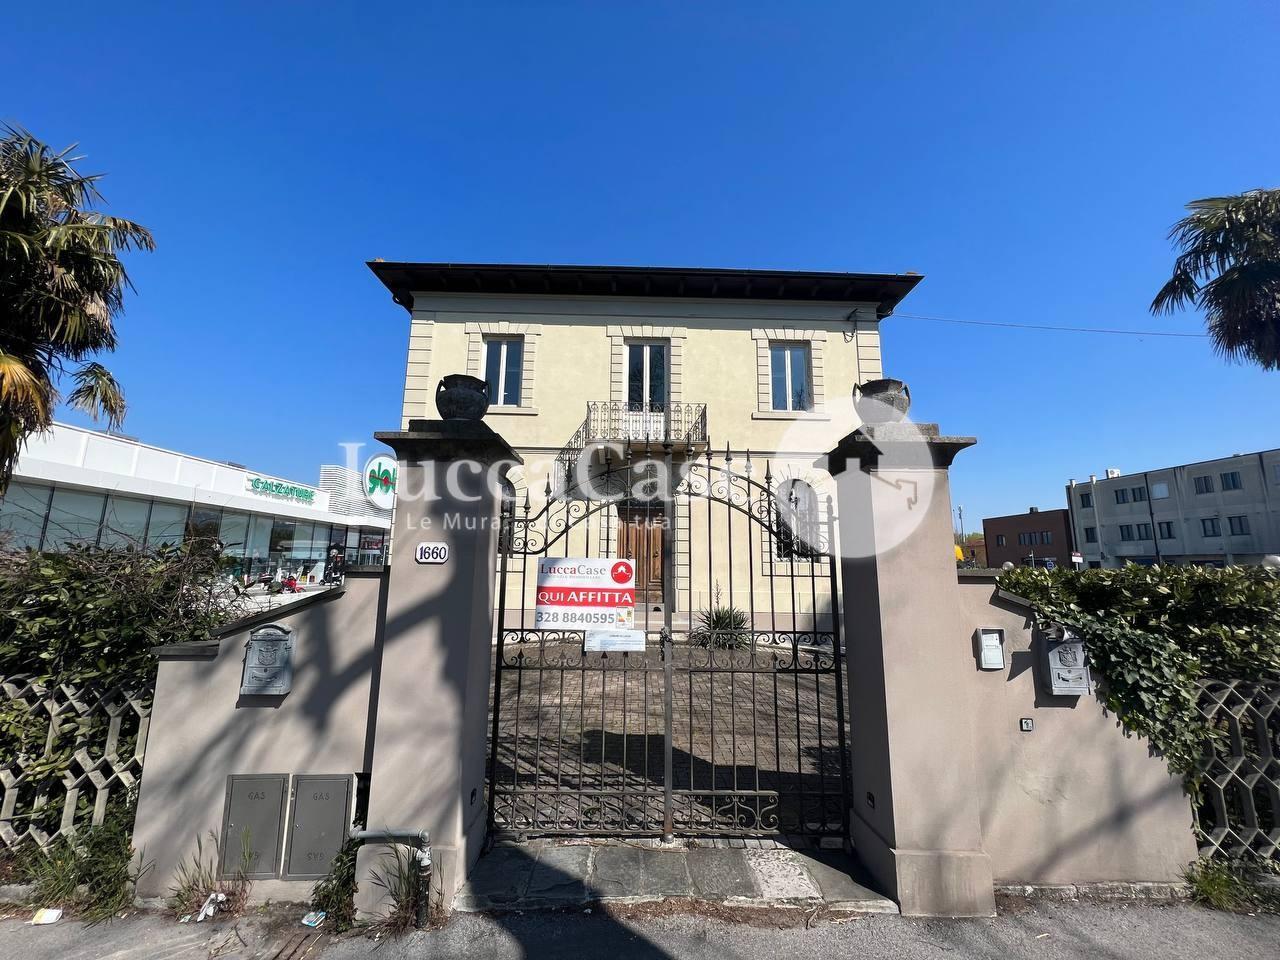 Business mall for sale in Lucca